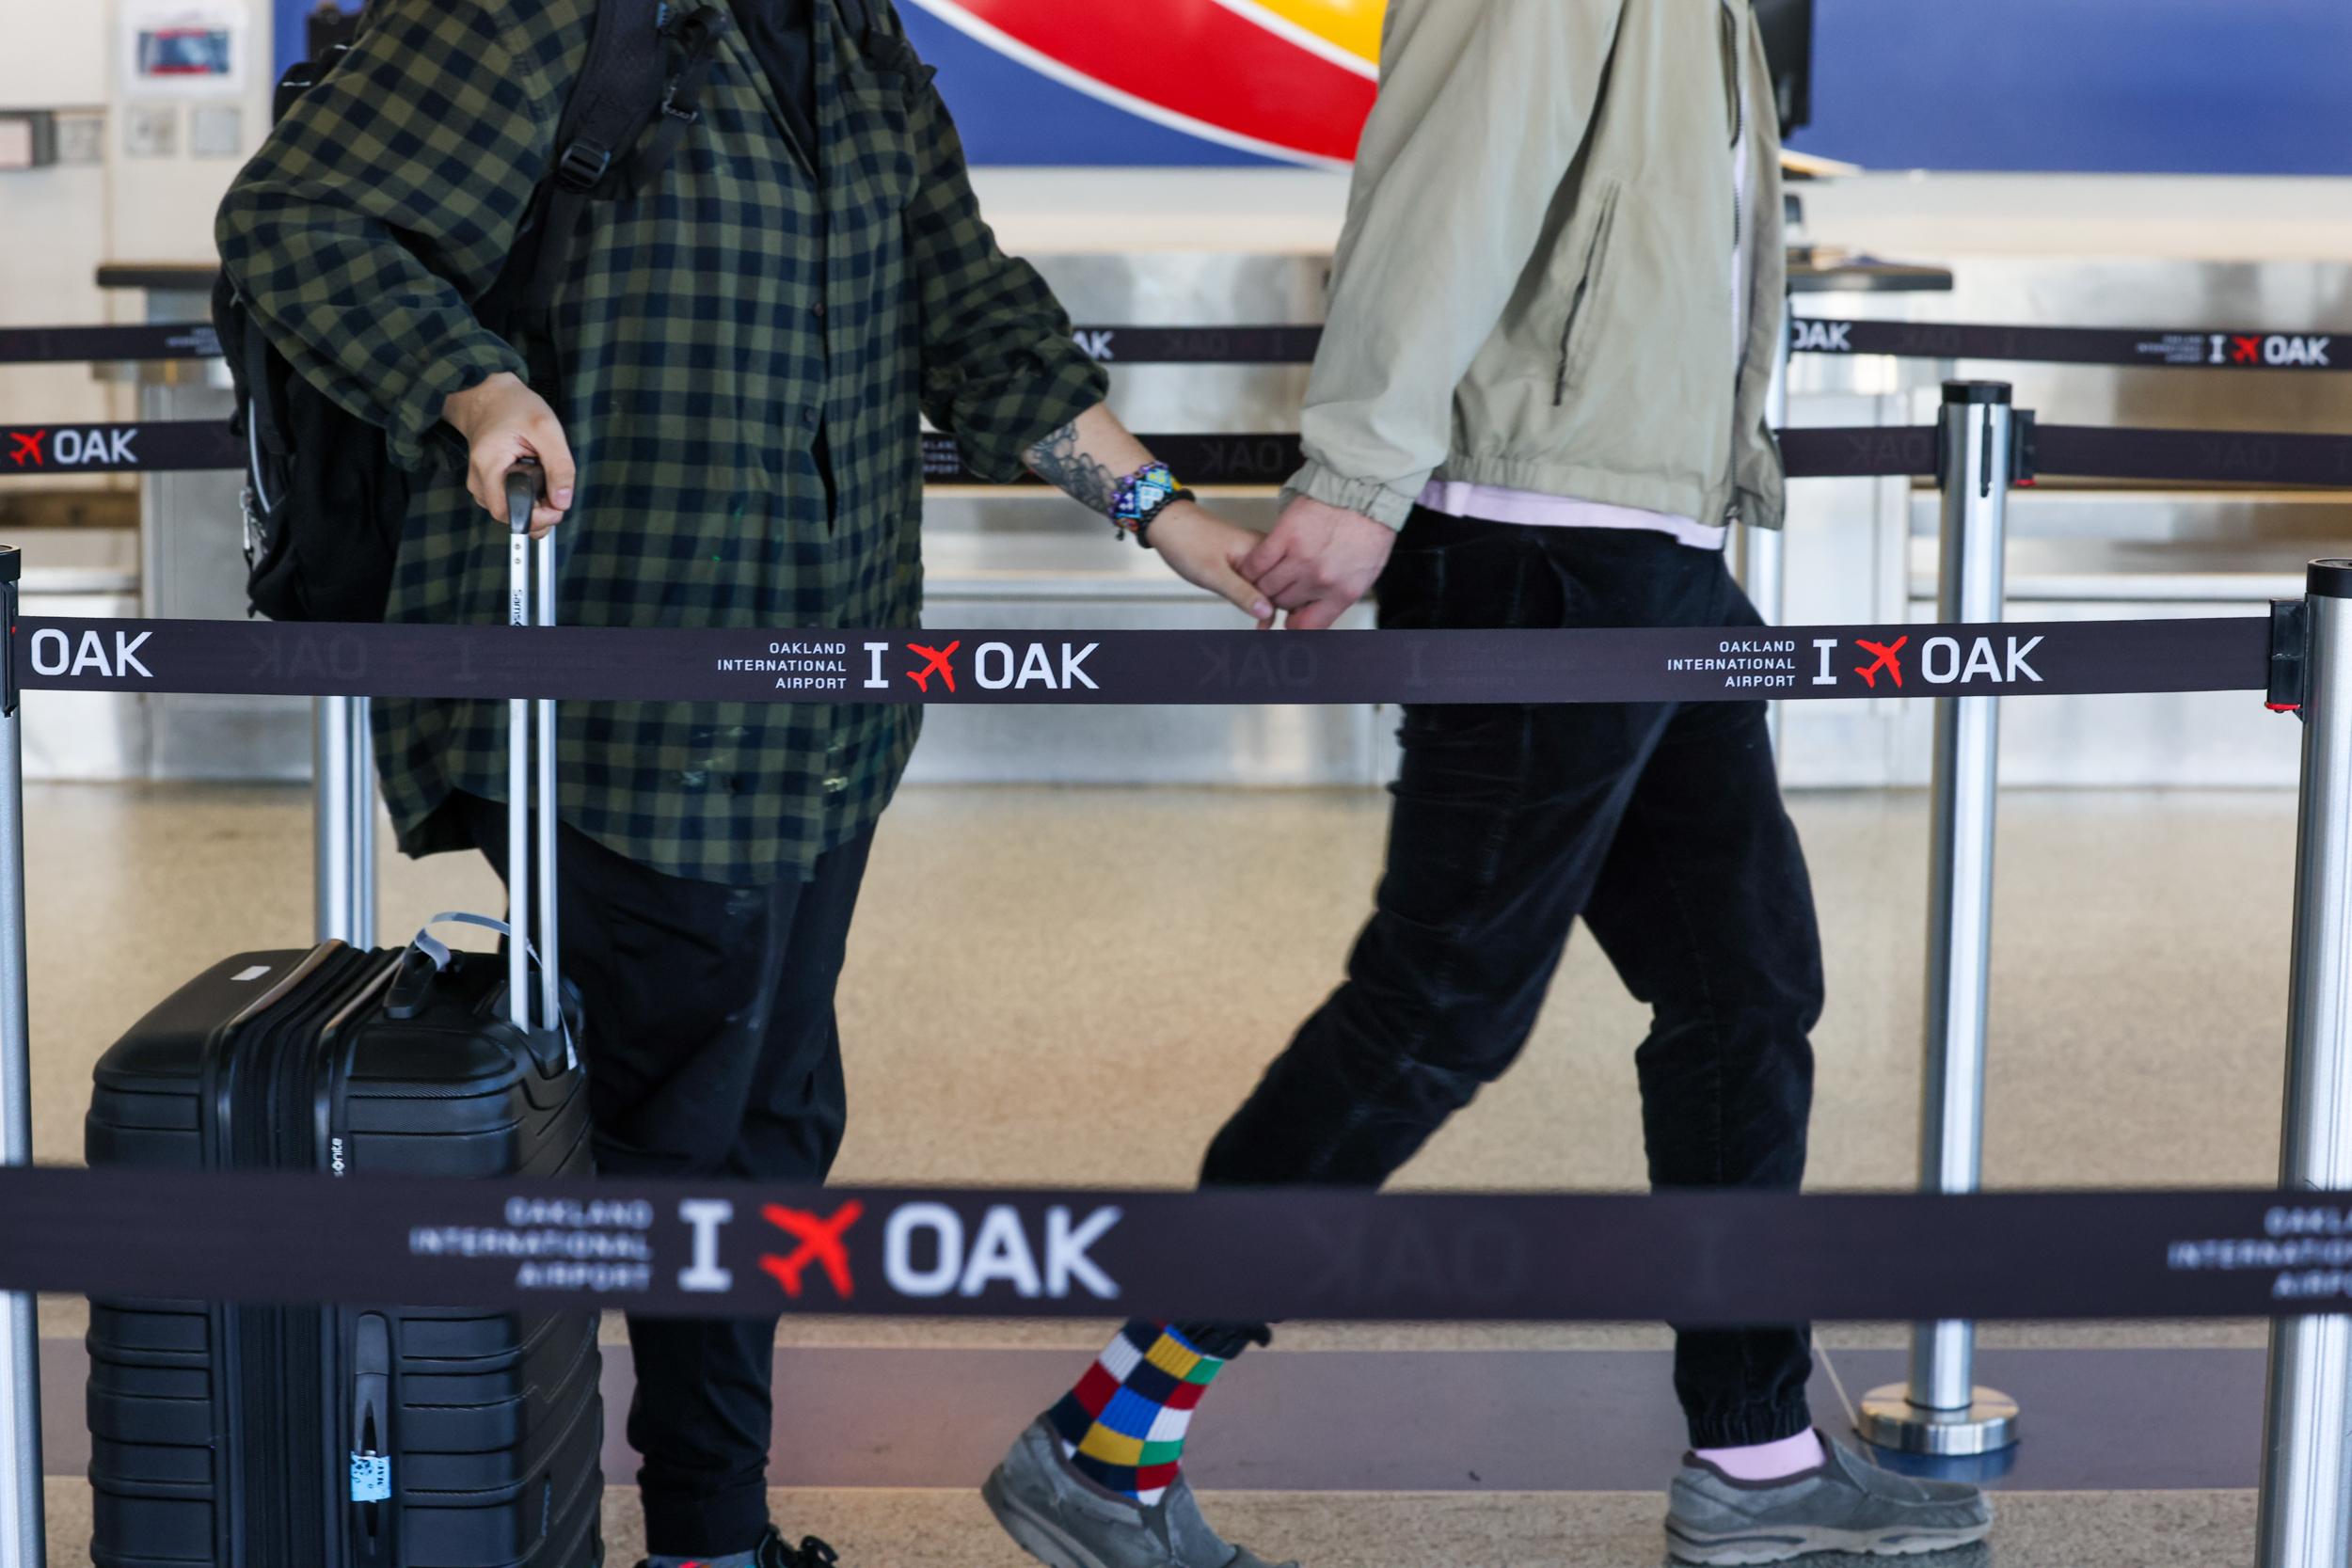 Two individuals at an airport hold hands behind a queue barrier, one with colorful socks, the other with a suitcase.